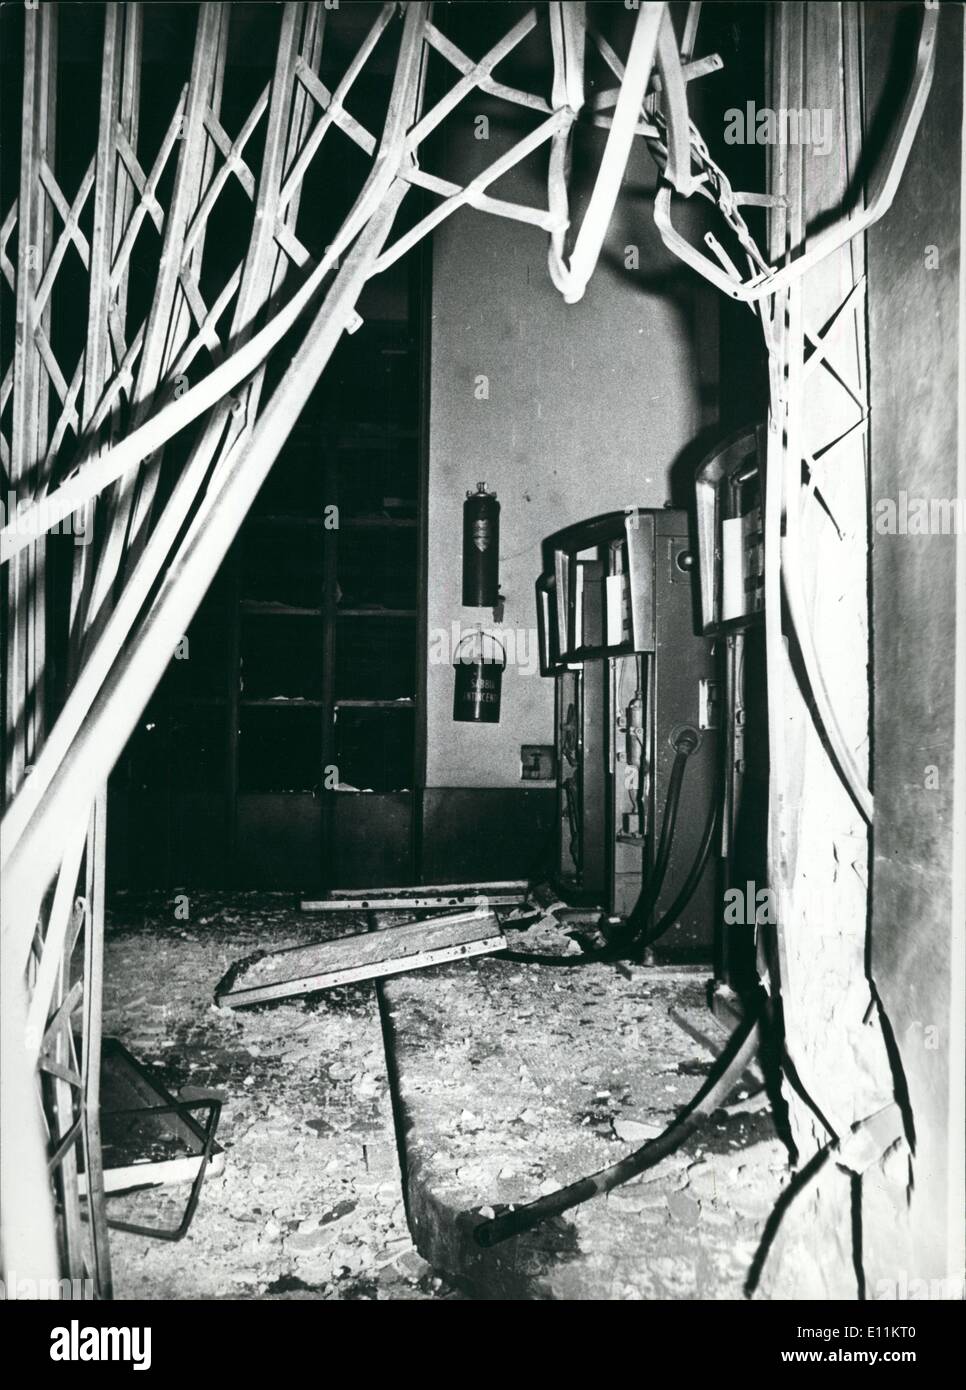 Jan. 01, 1979 - After The Killing of 2 young men by Police in Rome Our of the Fiat sales offices in Rome bombed. : Stock Photo